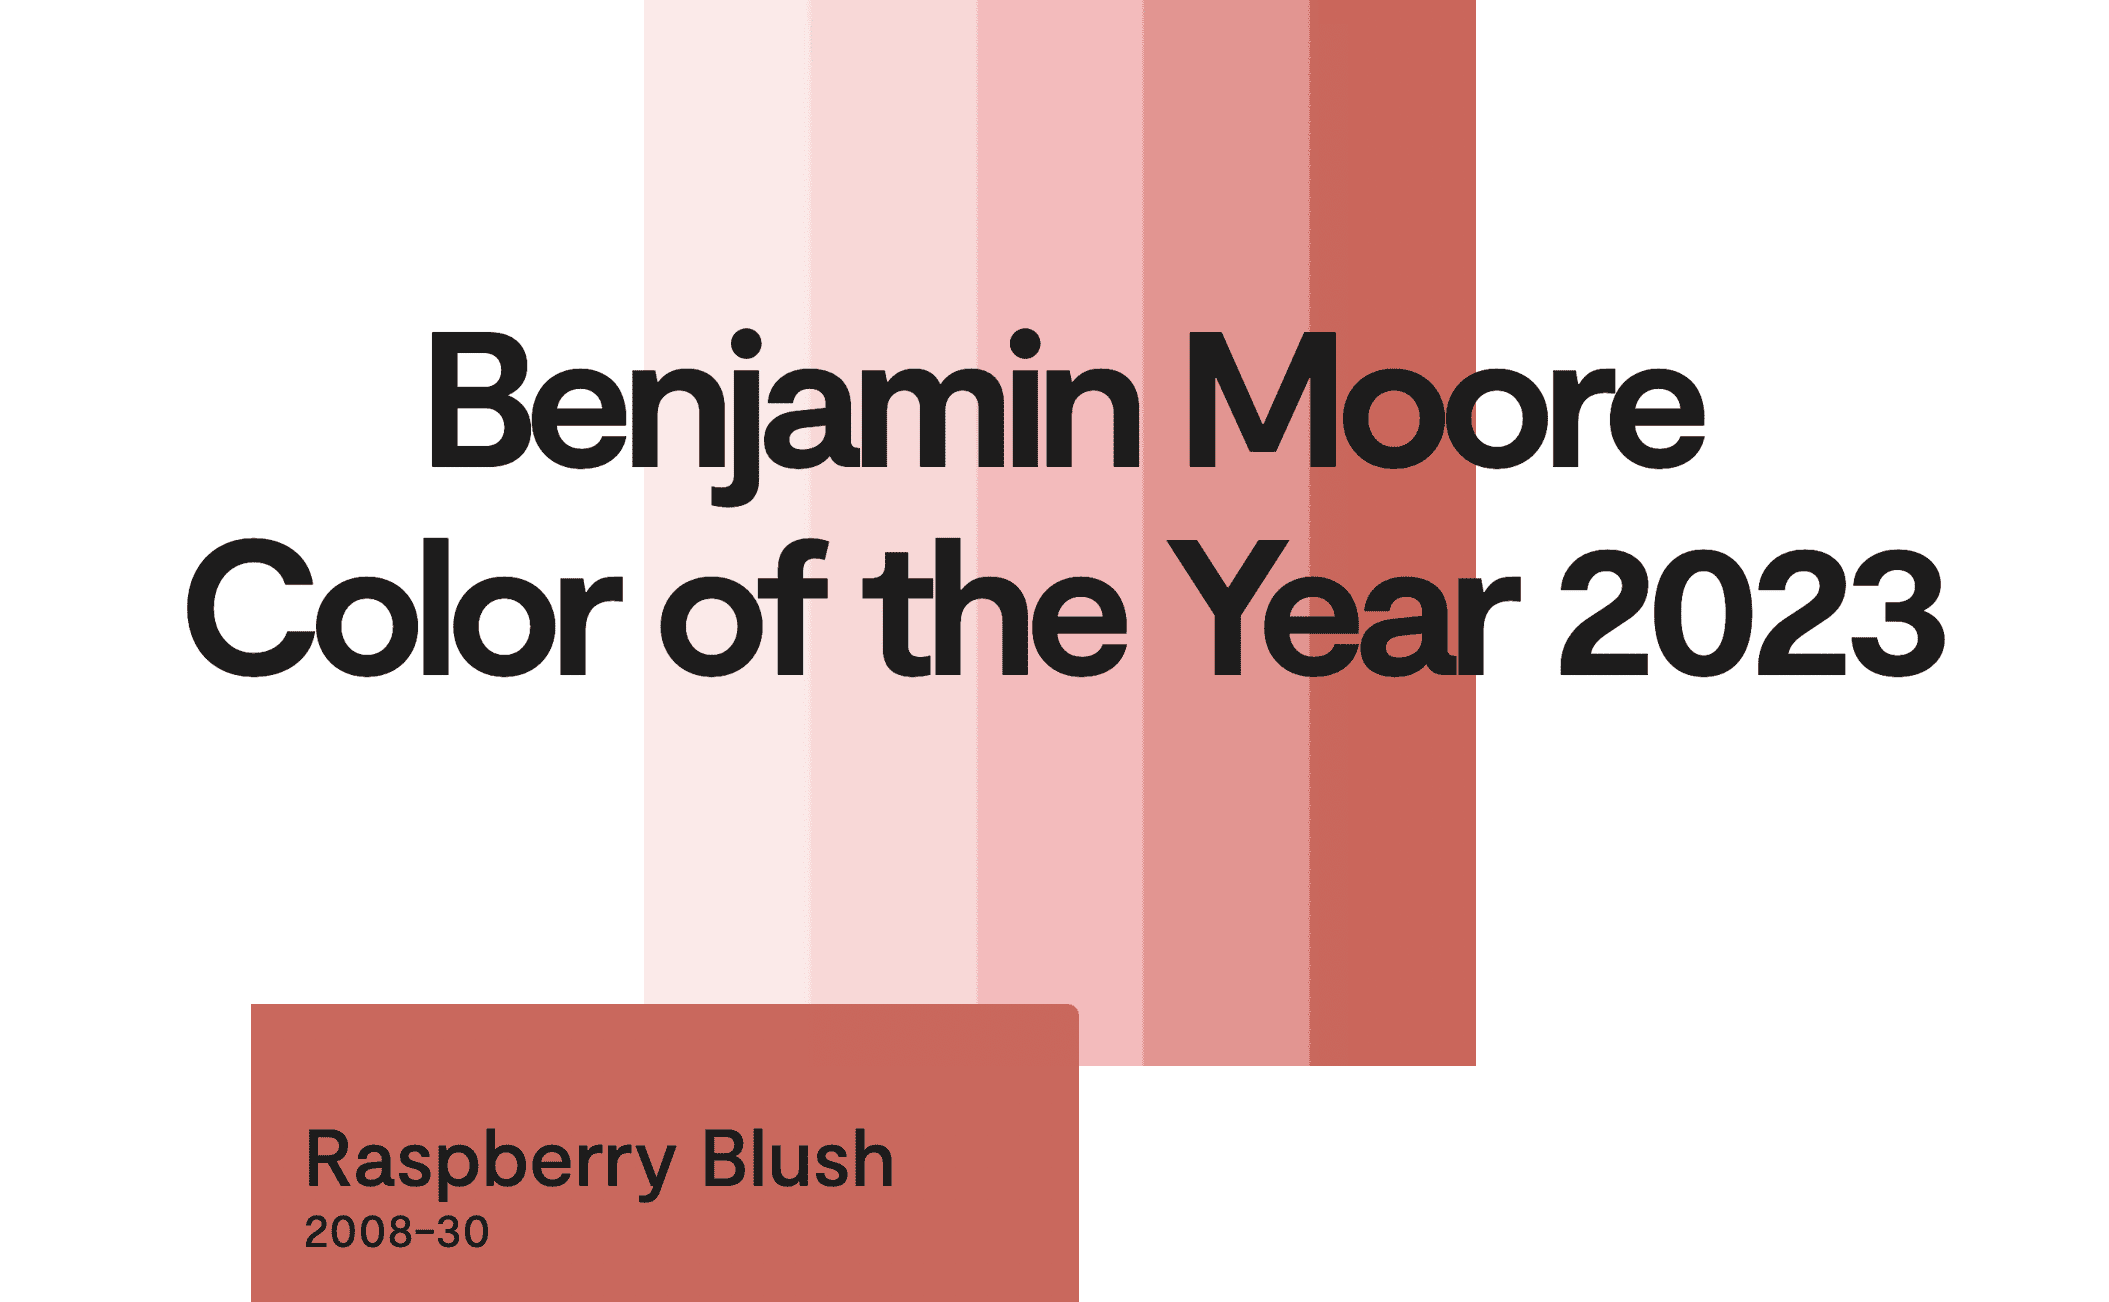 Benjamin Moore Color of the Year 2023 Raspberry Blush, Color Trends 2023 Palette Lancaster, Pennsylvania (PA)